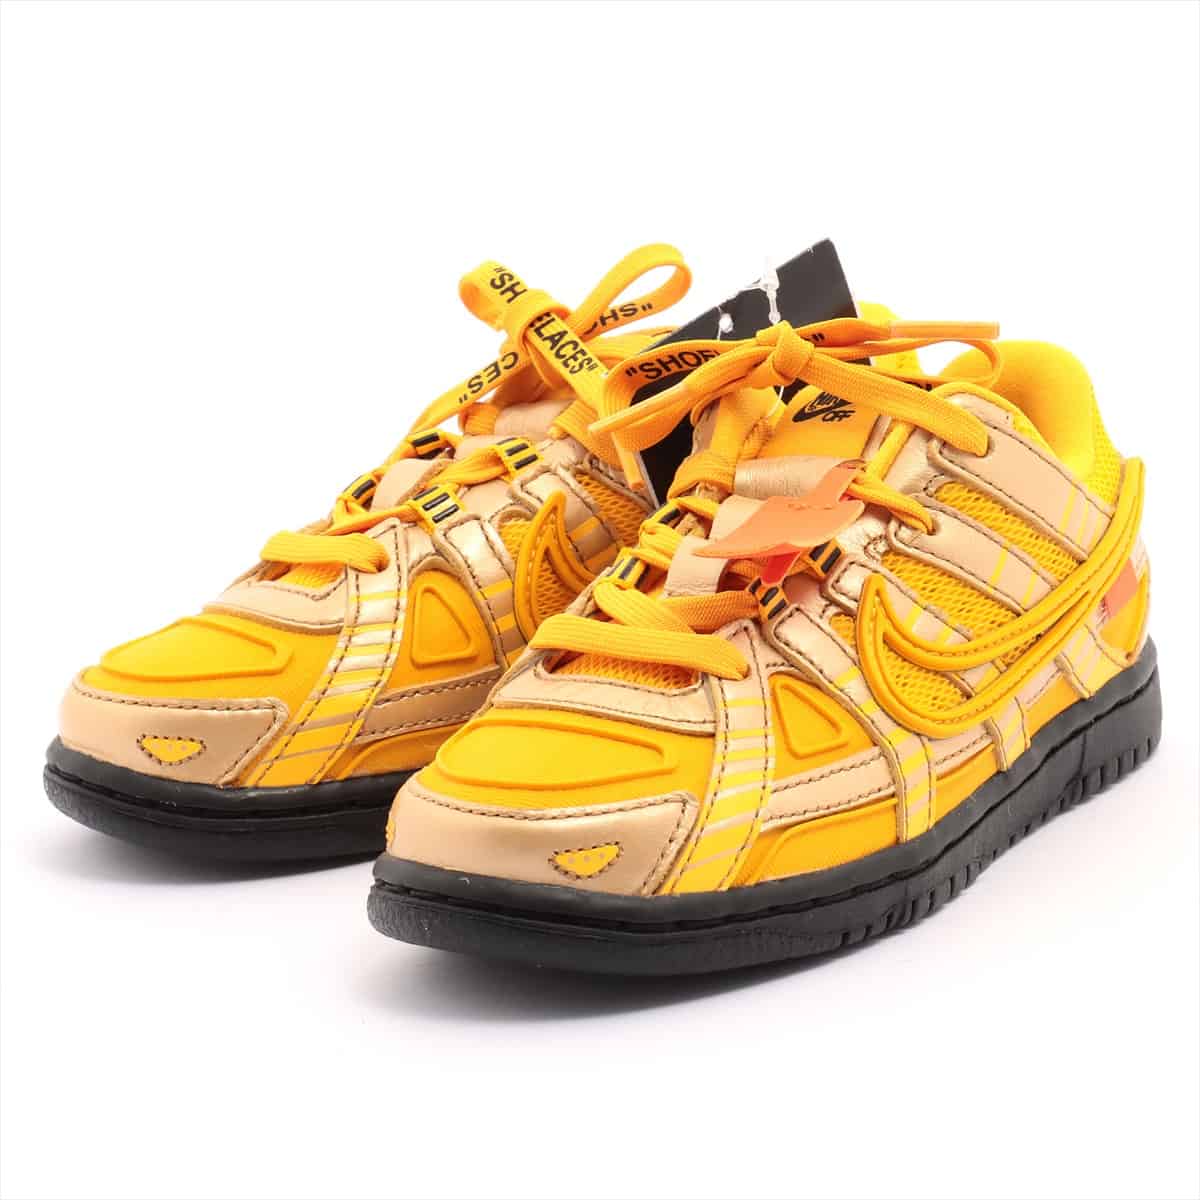 NIKE × OFF-WHITE Leather × Rubber Sneakers 18cm Kids Yellow